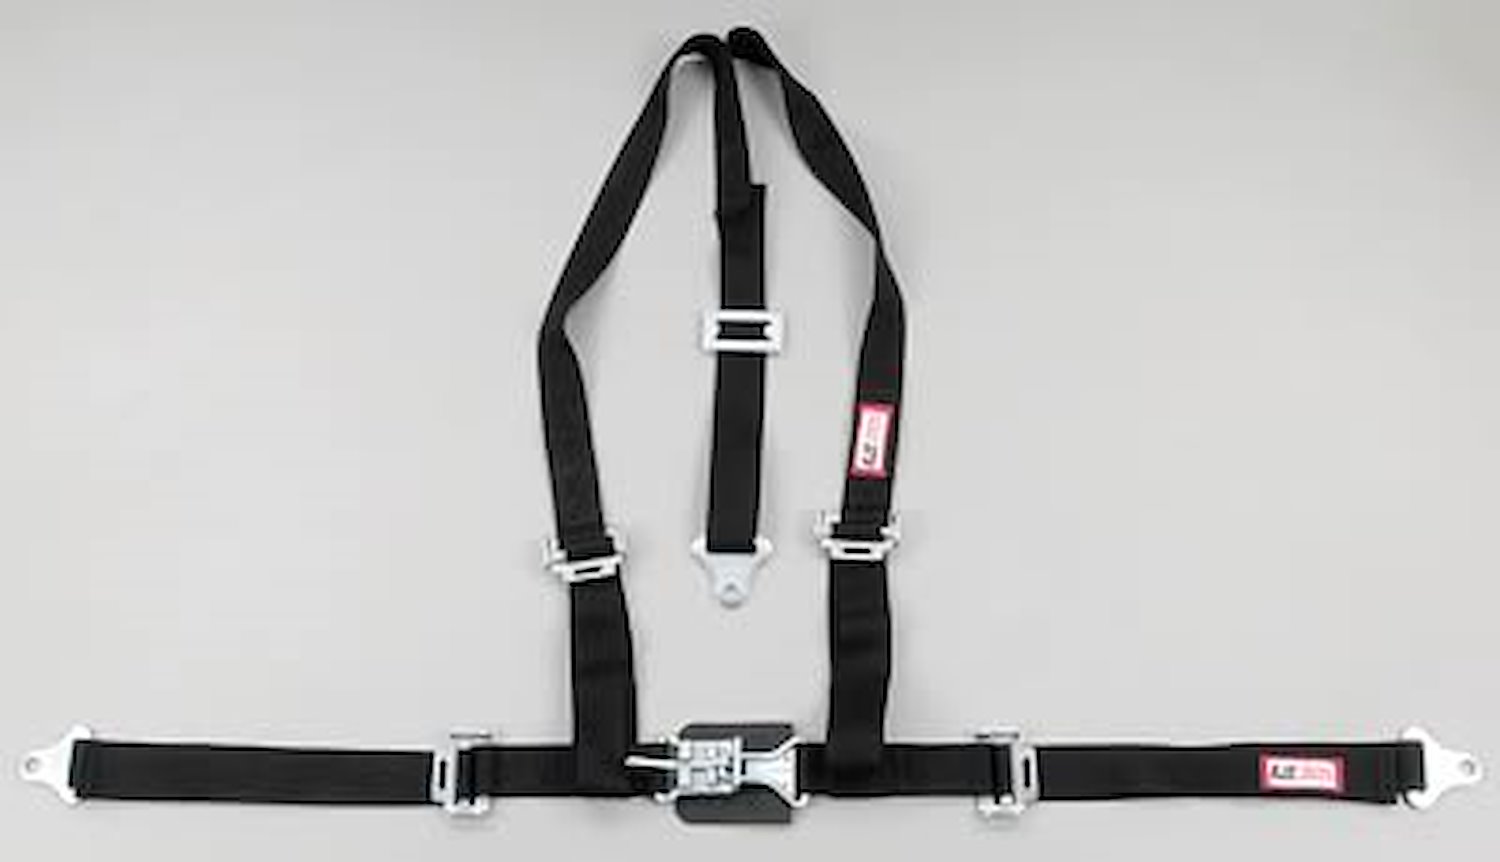 NON-SFI L&L HARNESS 3 PULL DOWN Lap Belt SEWN IN 2 S.H. Individual ROLL BAR Mount w/STERNUM STRAP ALL WRAP ENDS PURPLE